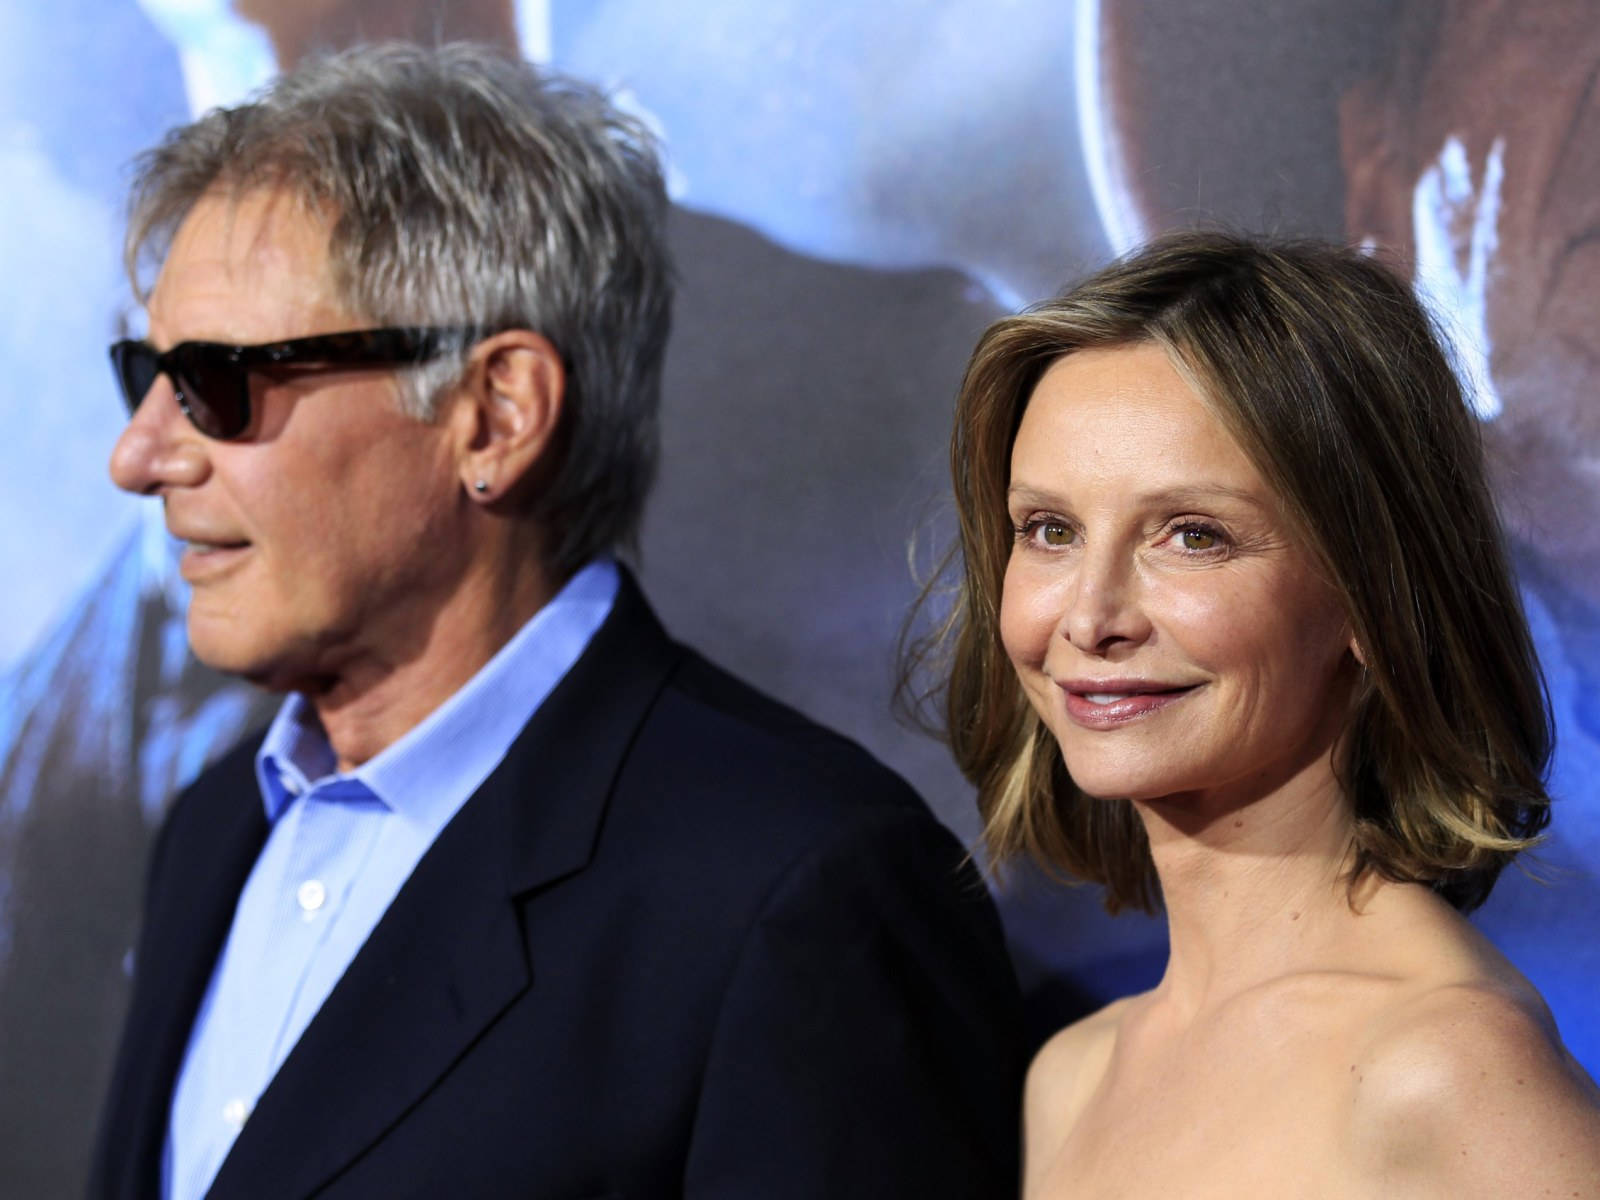 Calista Flockhart and Harrison Ford during a Hollywood event. Wallpaper